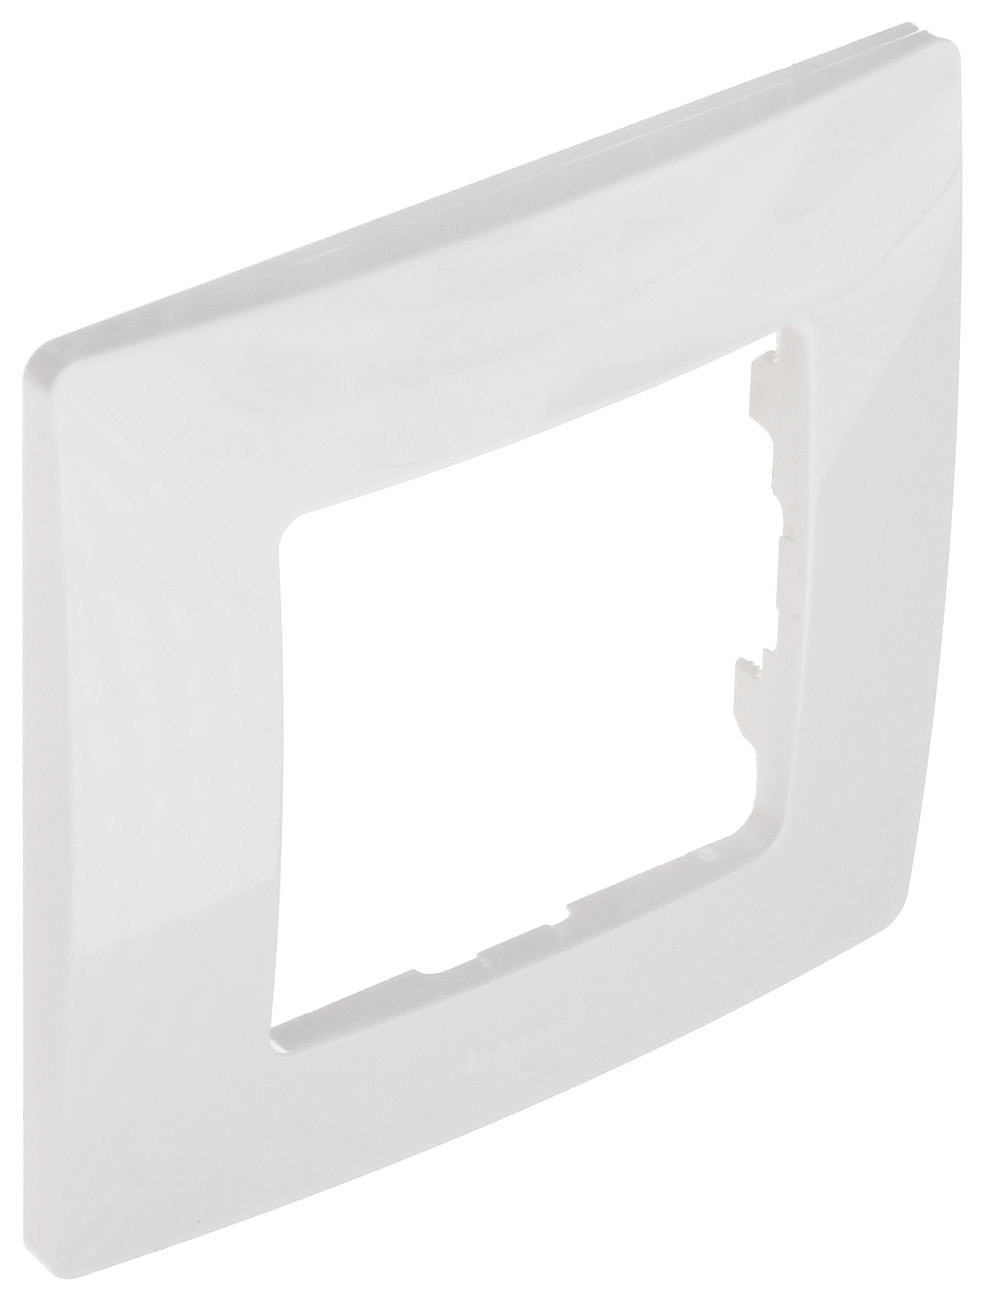 FRAME PLATE LE-665001 Niloe LEGRAND - Frames for Sockets and Switches -  Delta